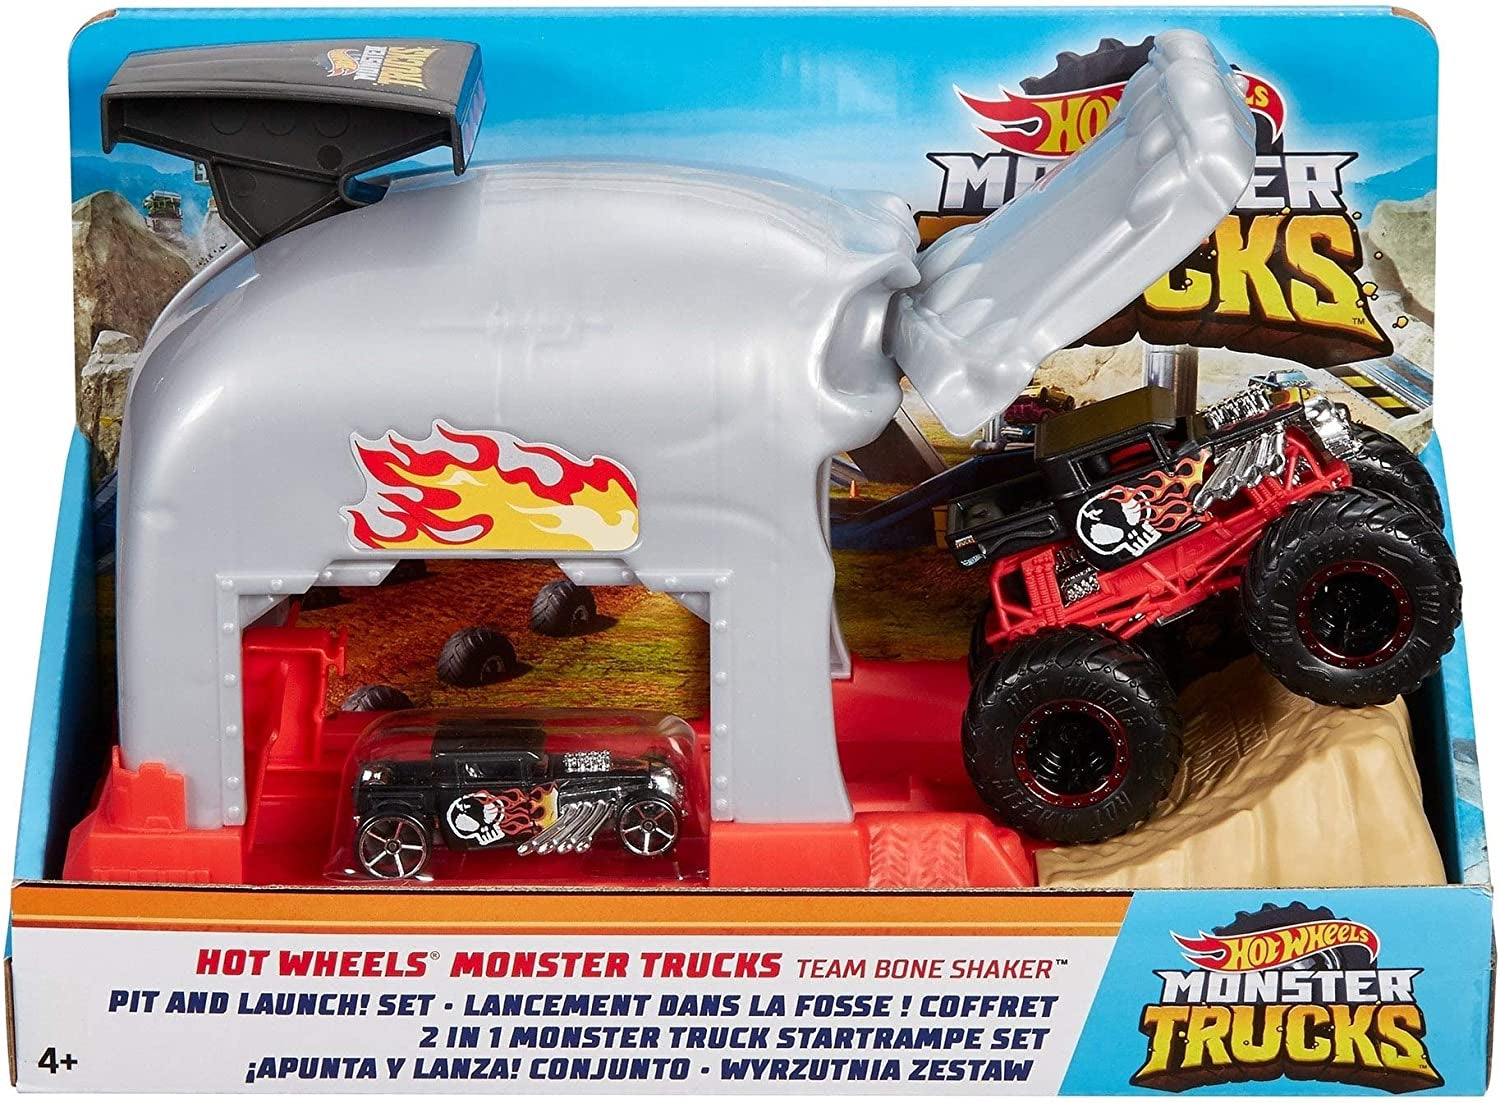 Hot Wheels Monster Truck Pit & Launch Play Sets with a Monster Truck and a 1:64 Car, Team Bone Shaker